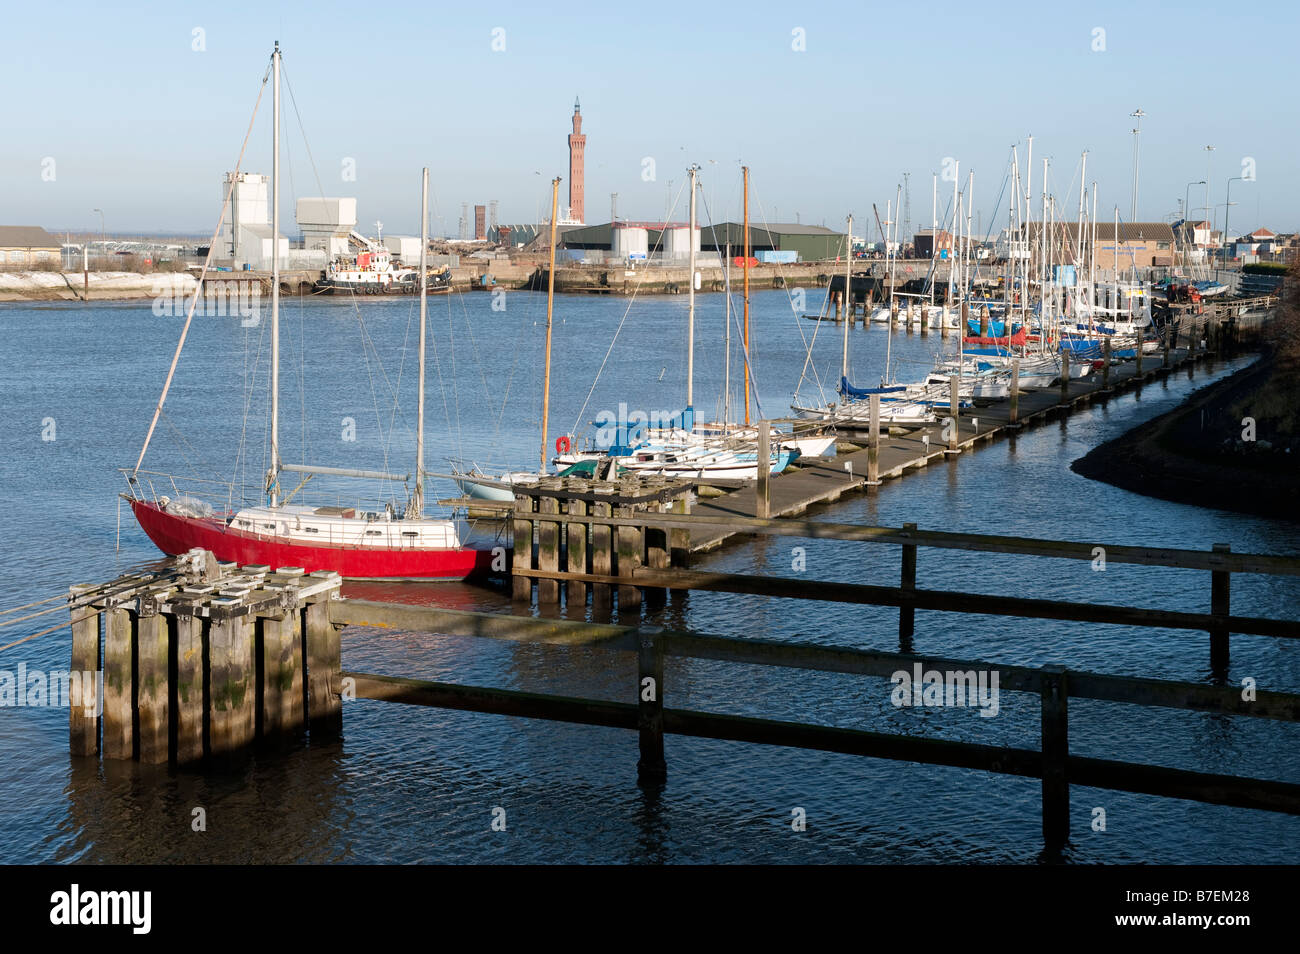 Grimsby and Cleethorpes Yatch club sail boats moored in Grimsby Dock Stock Photo